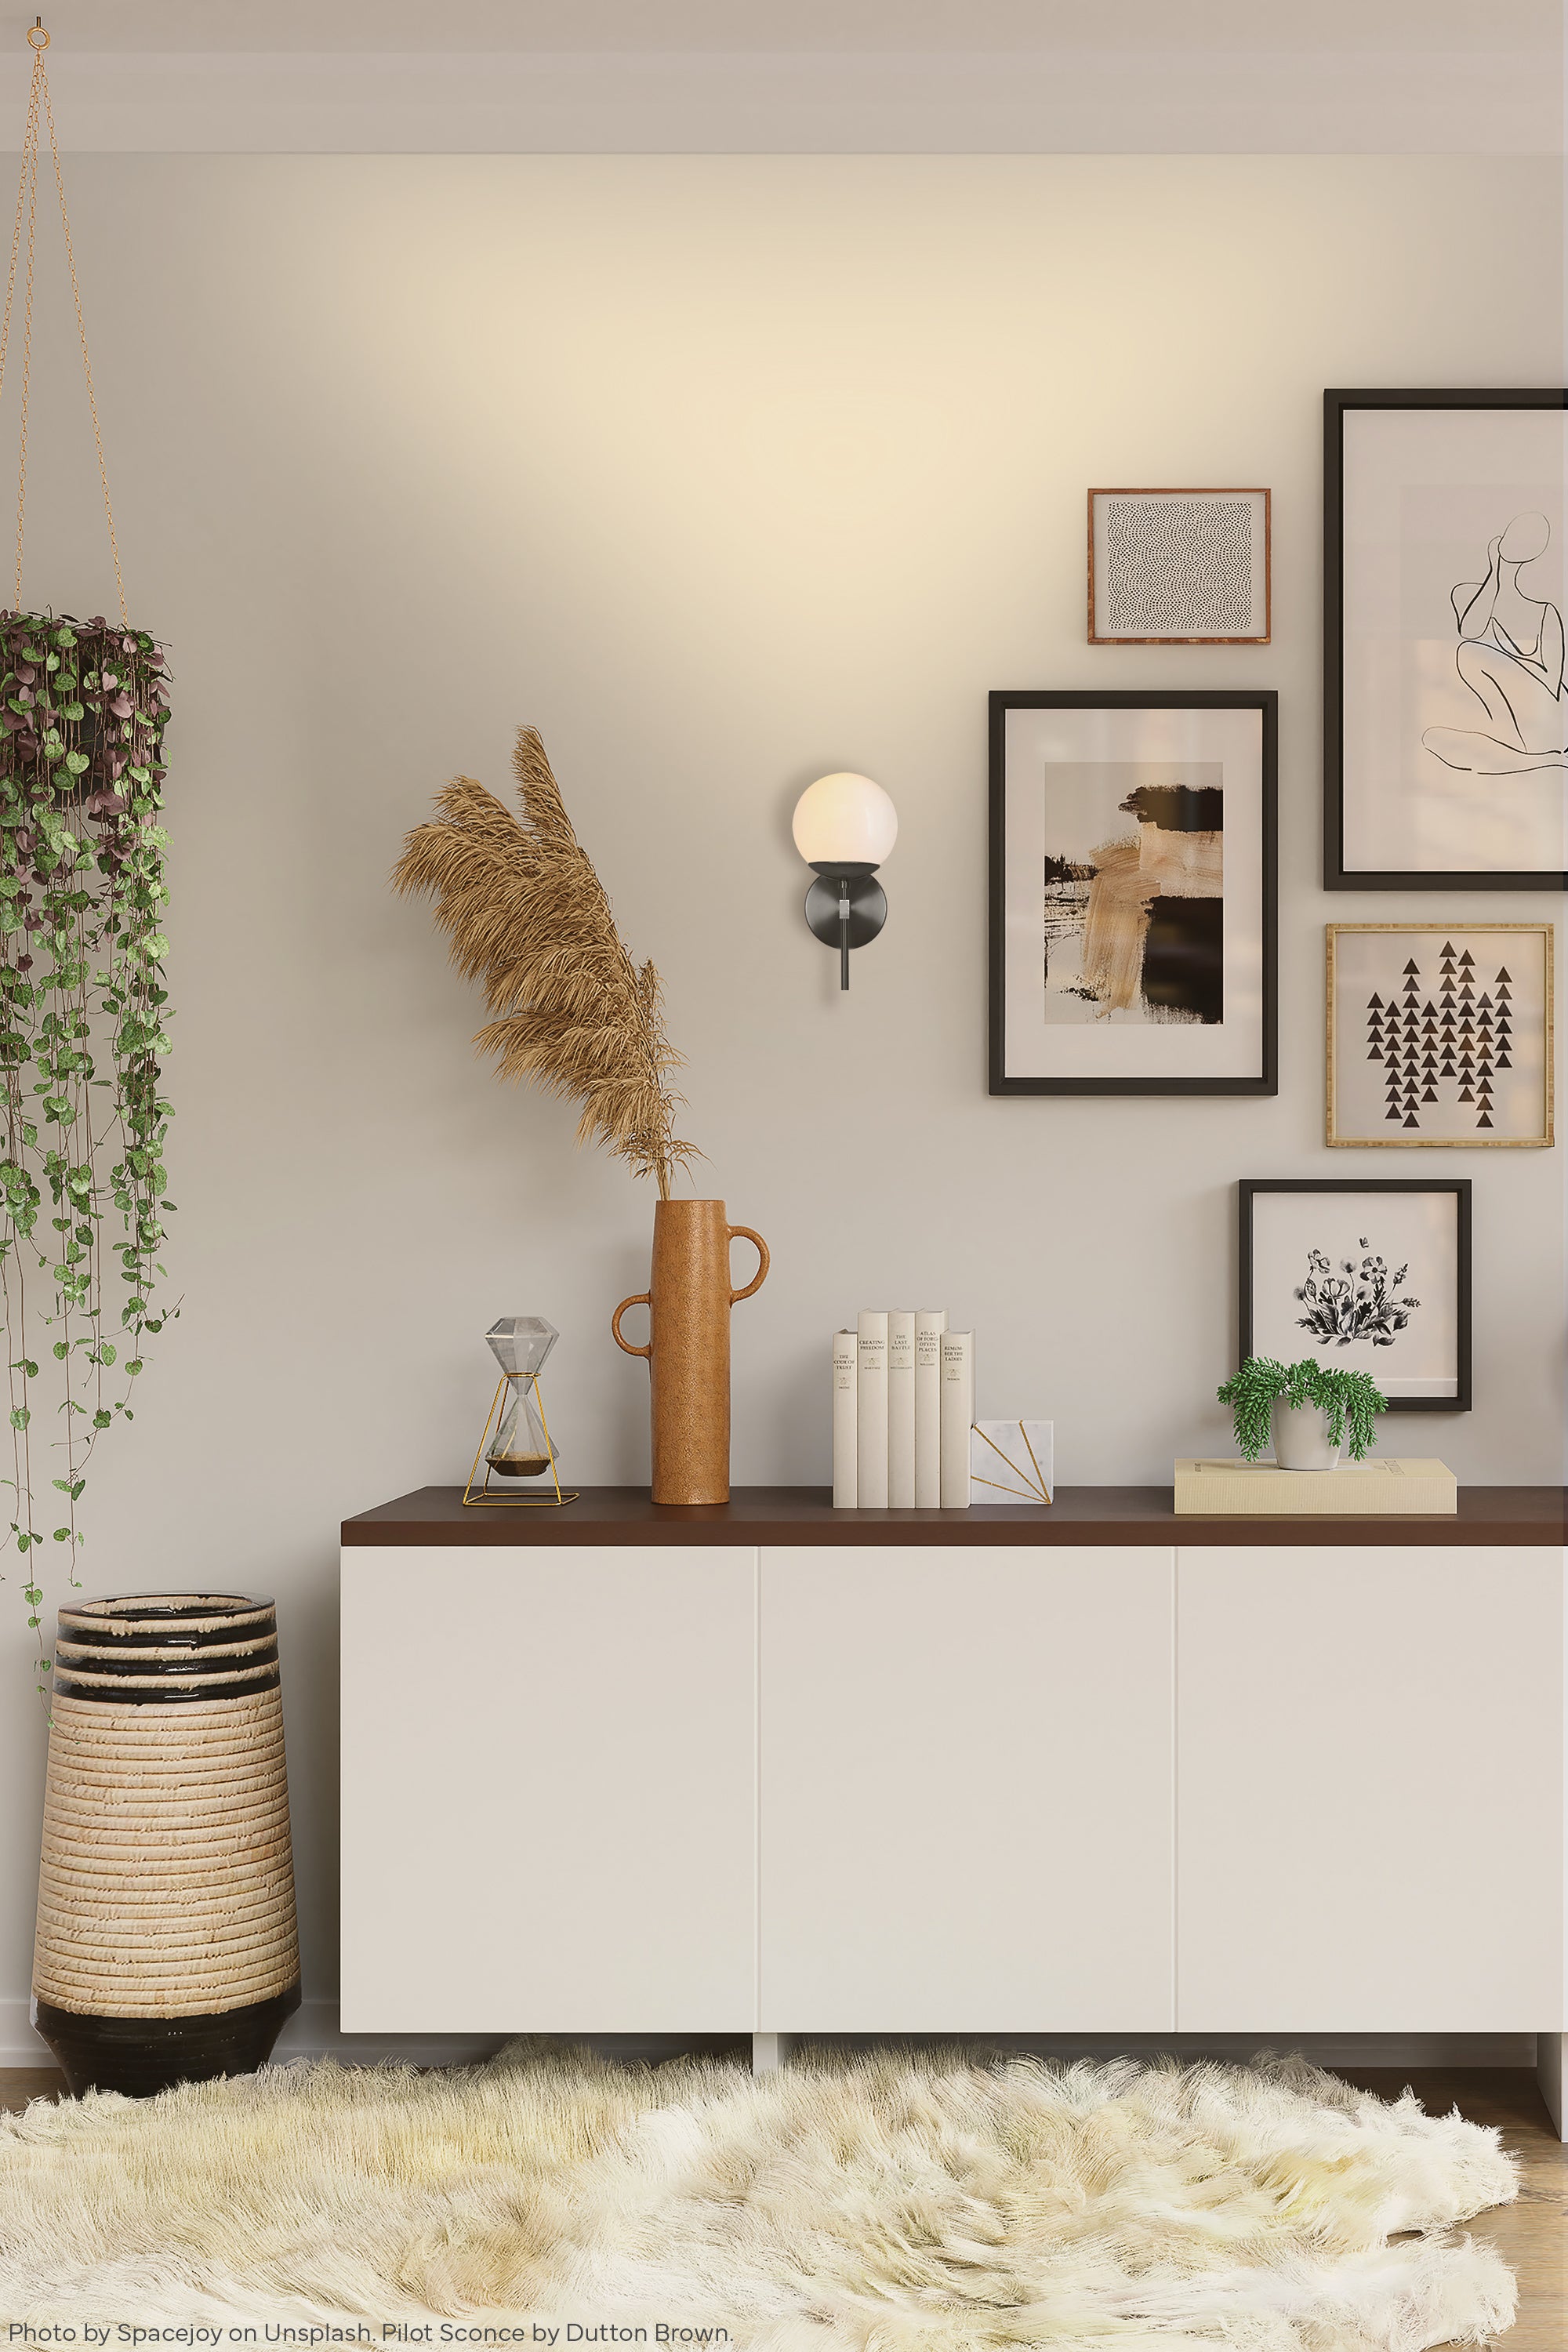 Black Lolli sconce 6" by by Dutton Brown. Photo by Spacejoy via Unsplash. _hover